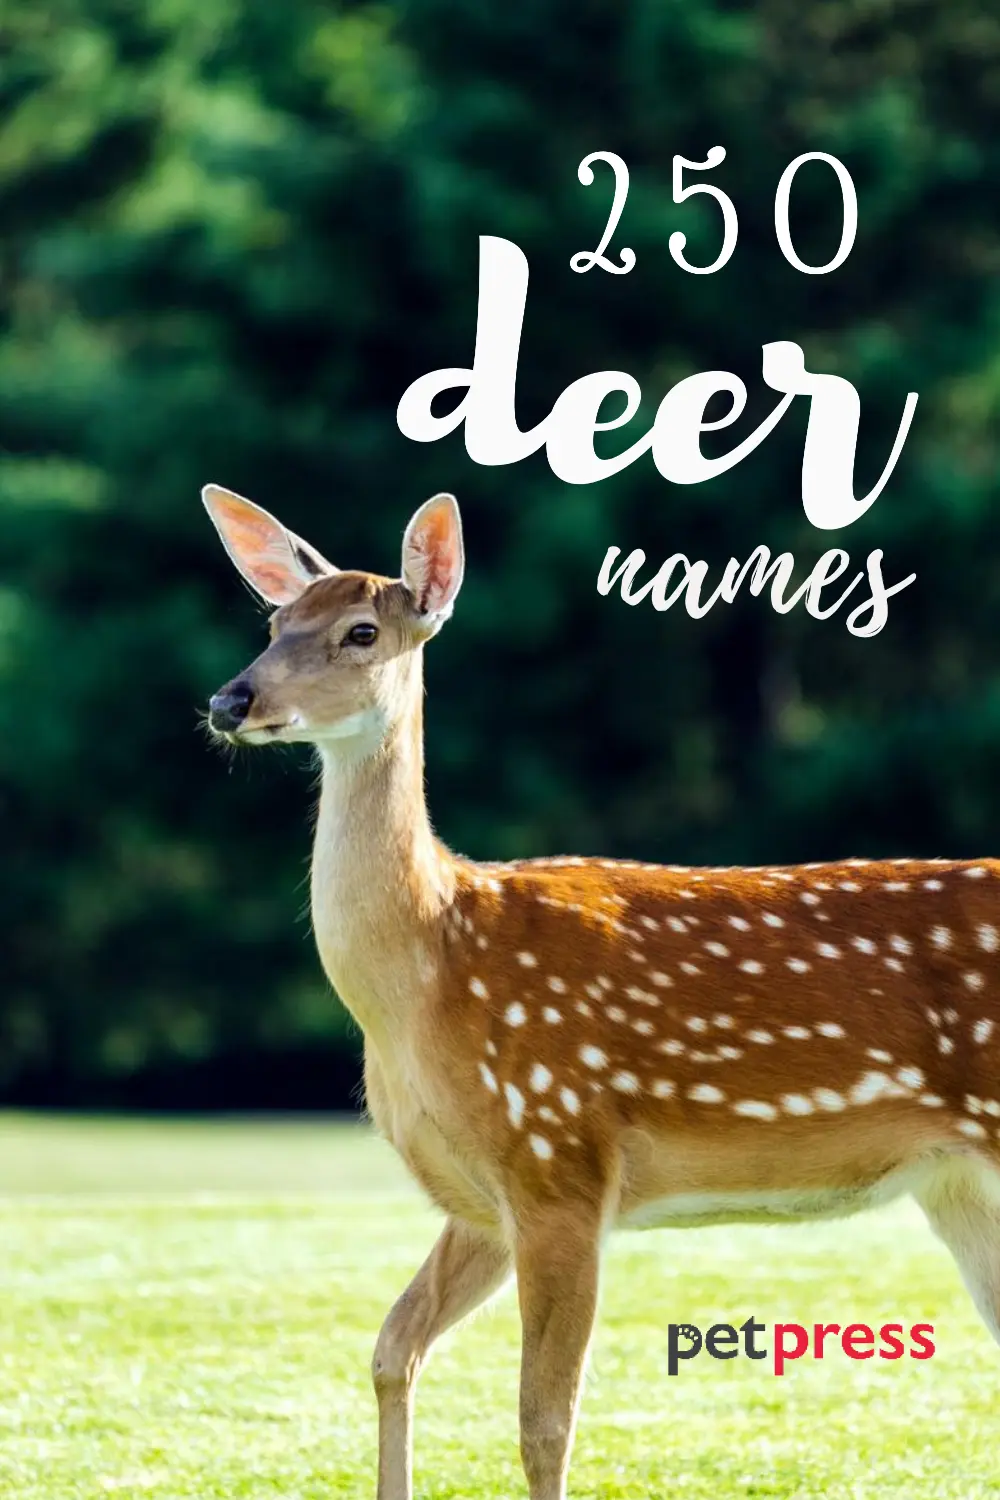 What is a good name for a baby deer?